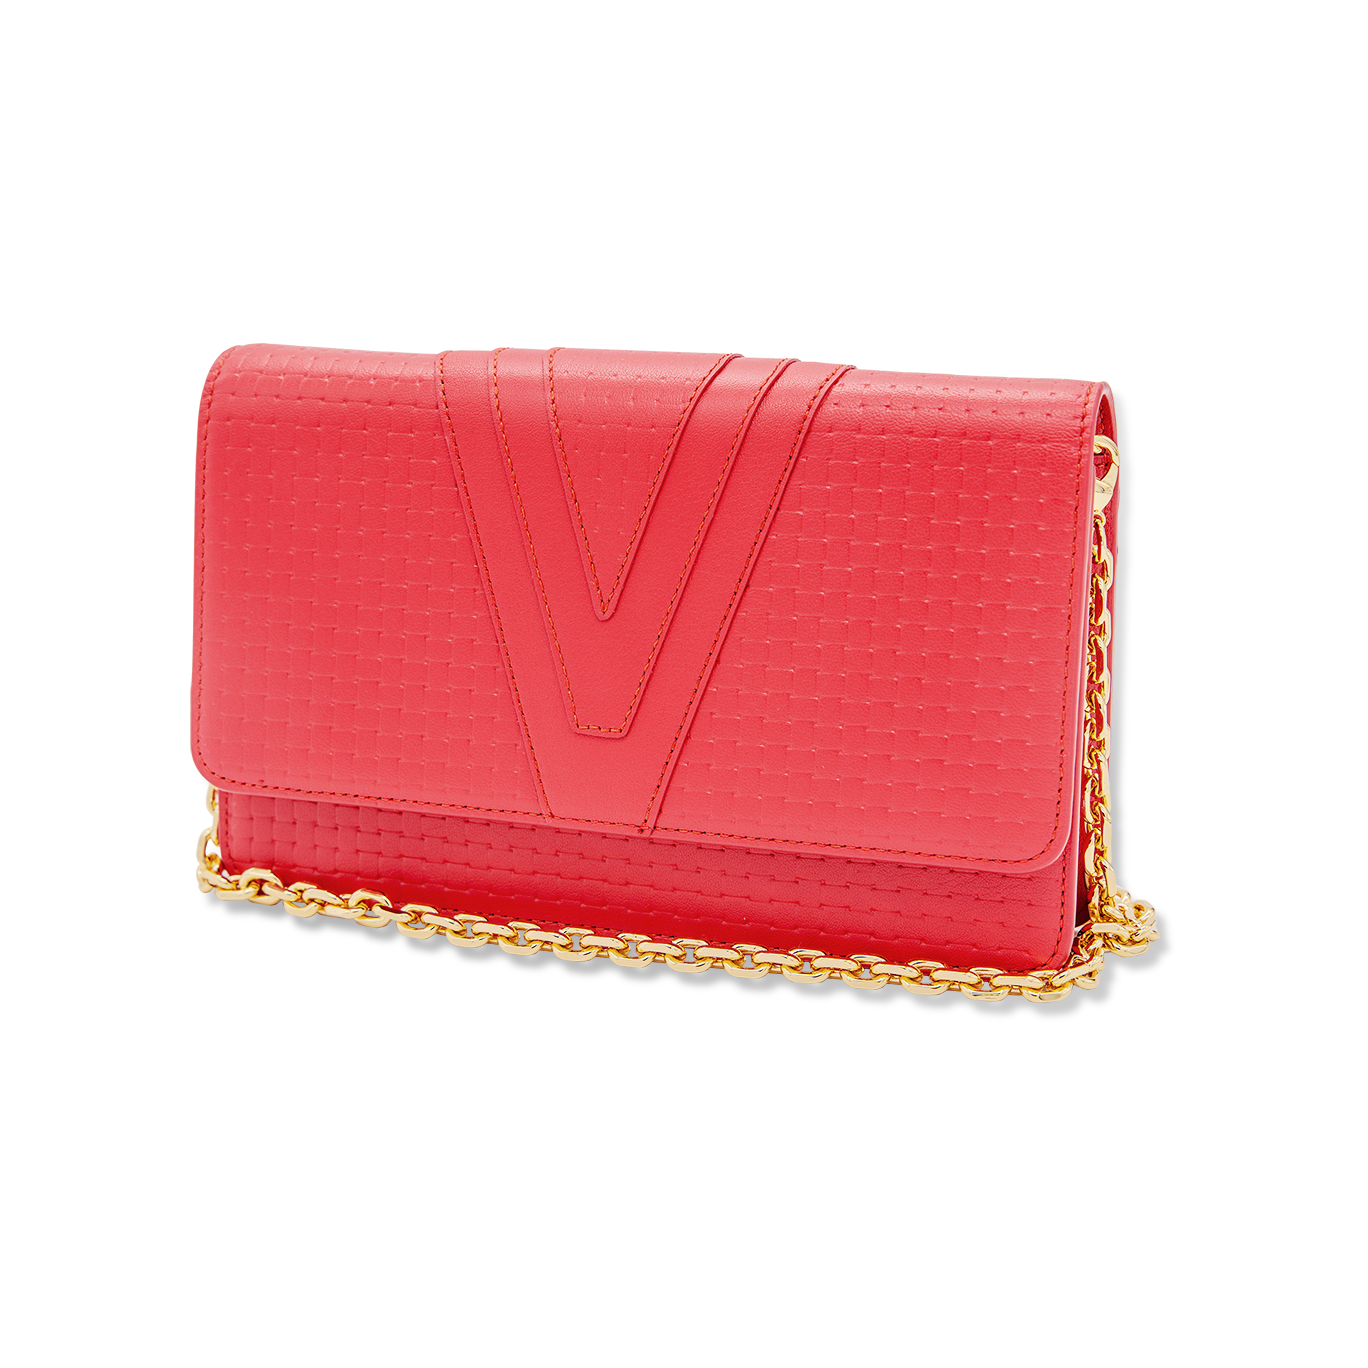 ORNATO CHAIN CROSS BAG  [RED] with Gold Chain